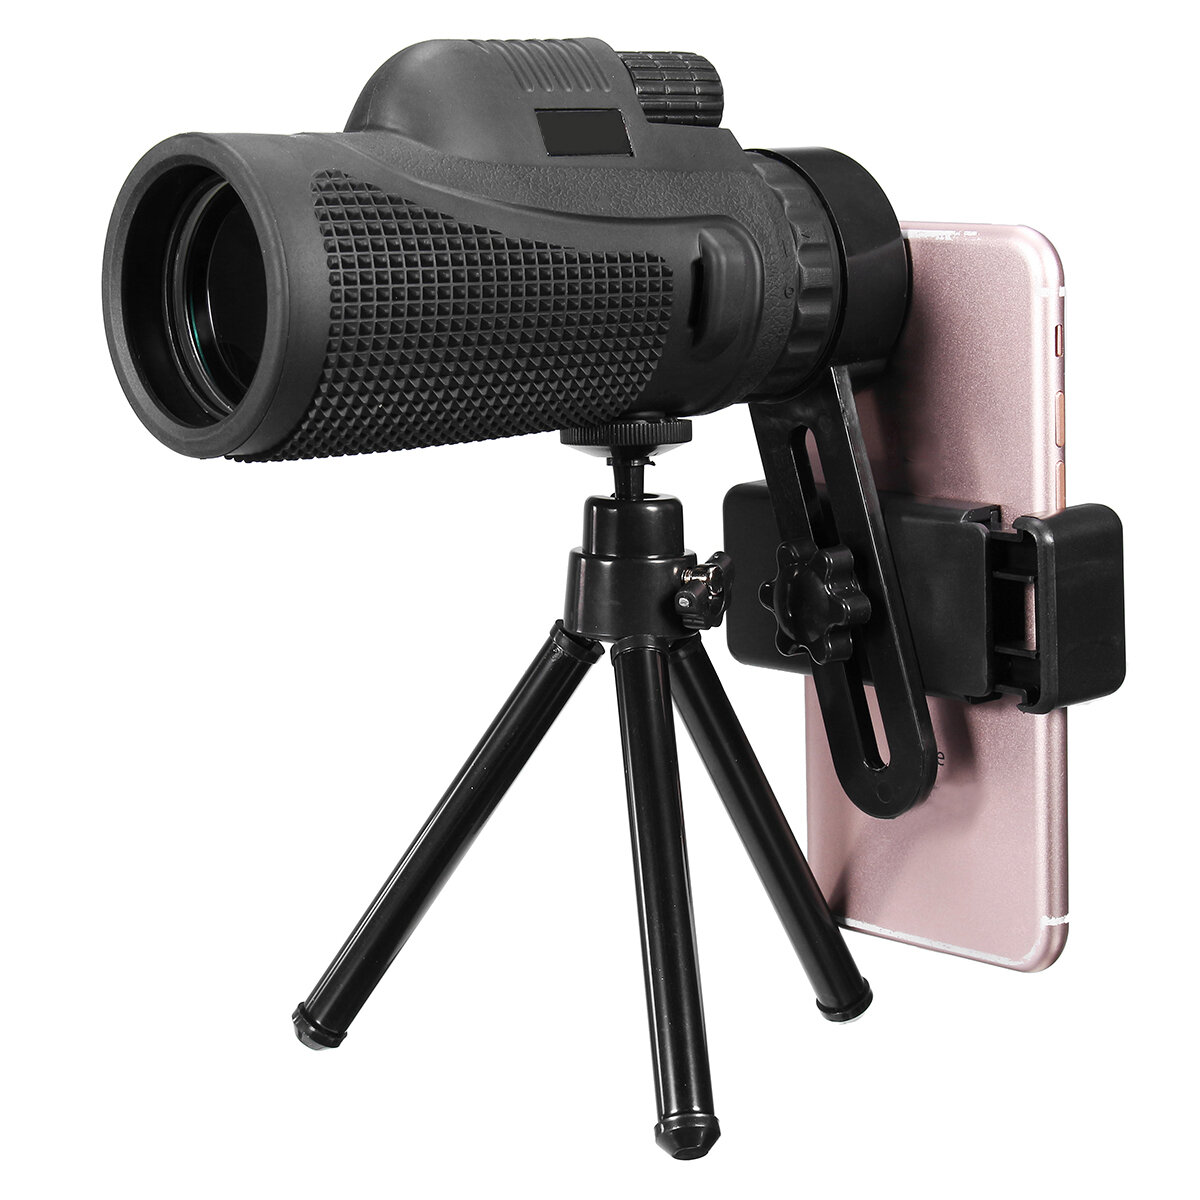 16X52/40X60 HD Zoom Monocular Telescope Telephoto Camera Lens Phone Holder/Tripod Gift for Outdoor Travel Hiking